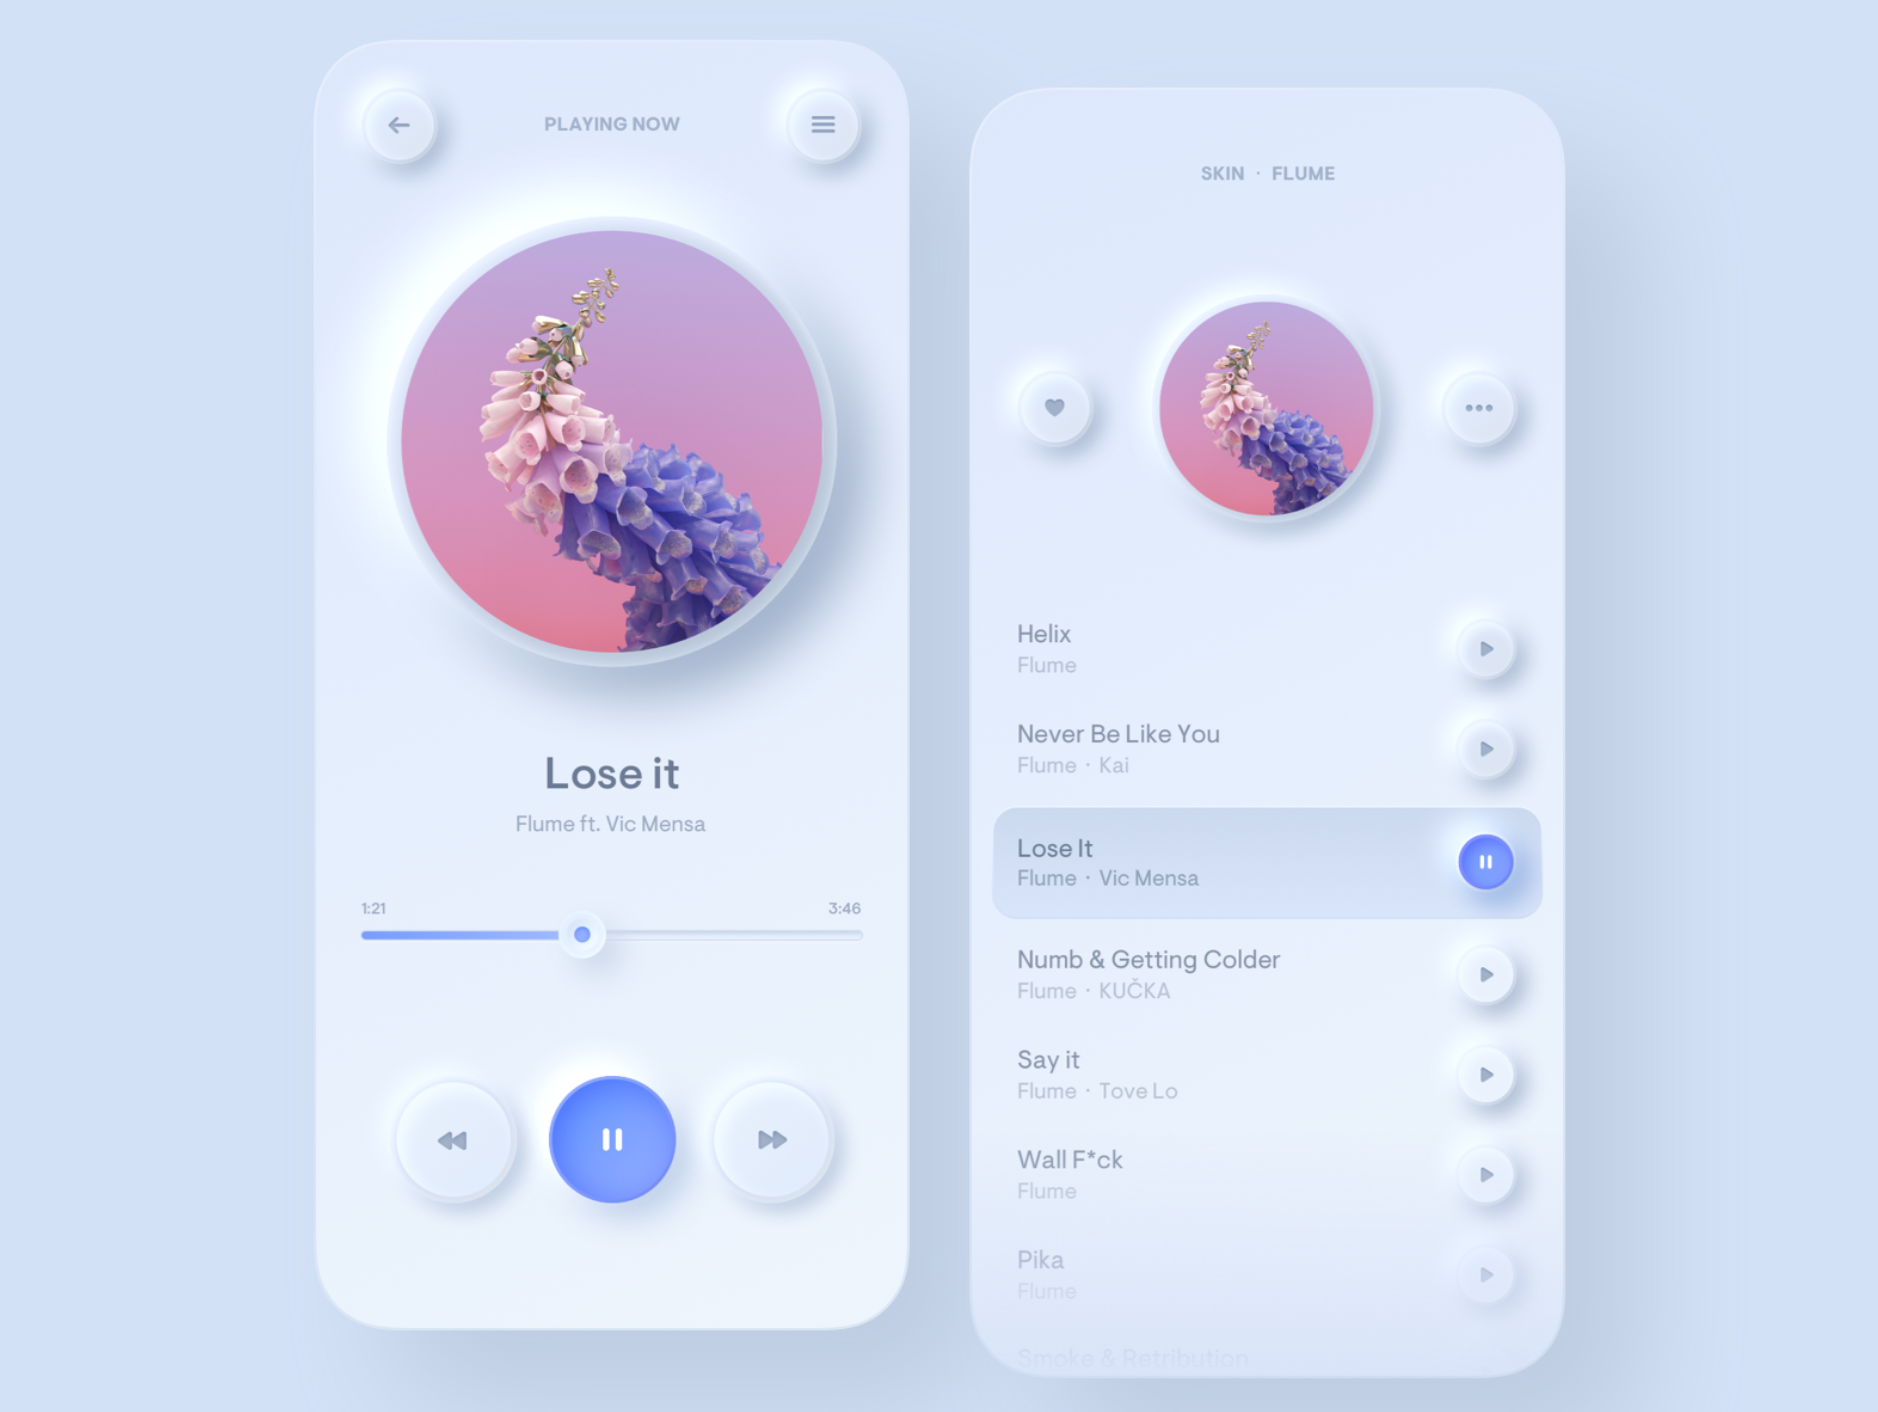 UI Design Trends for 2021 Predictions